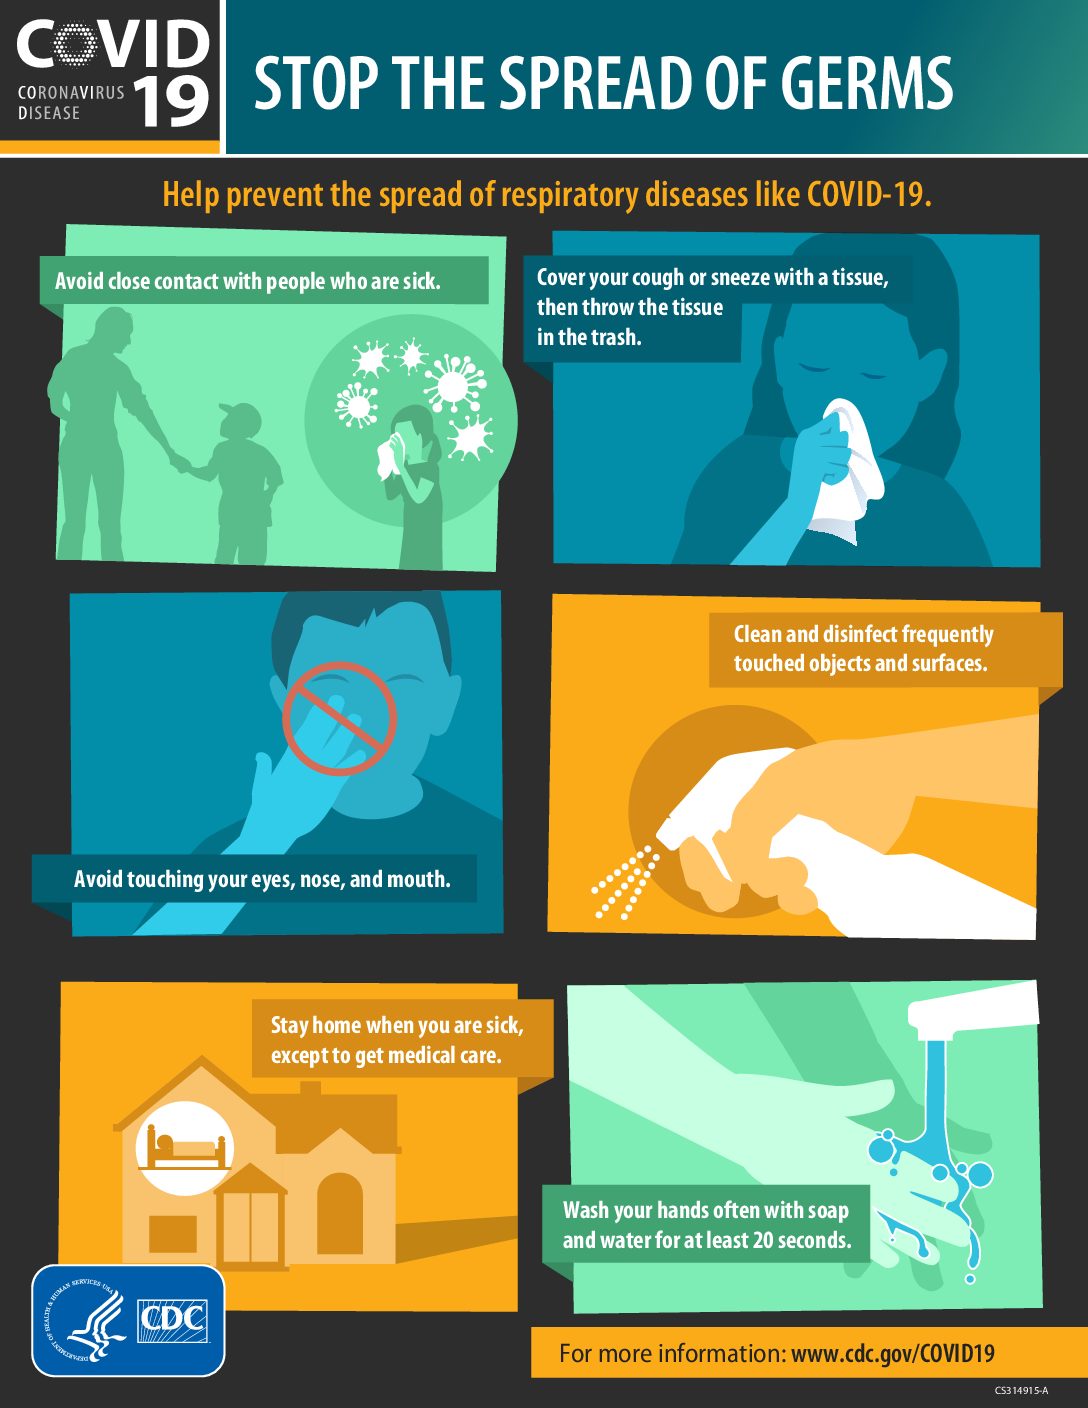 Stop the spread of Germs visual from the CDC